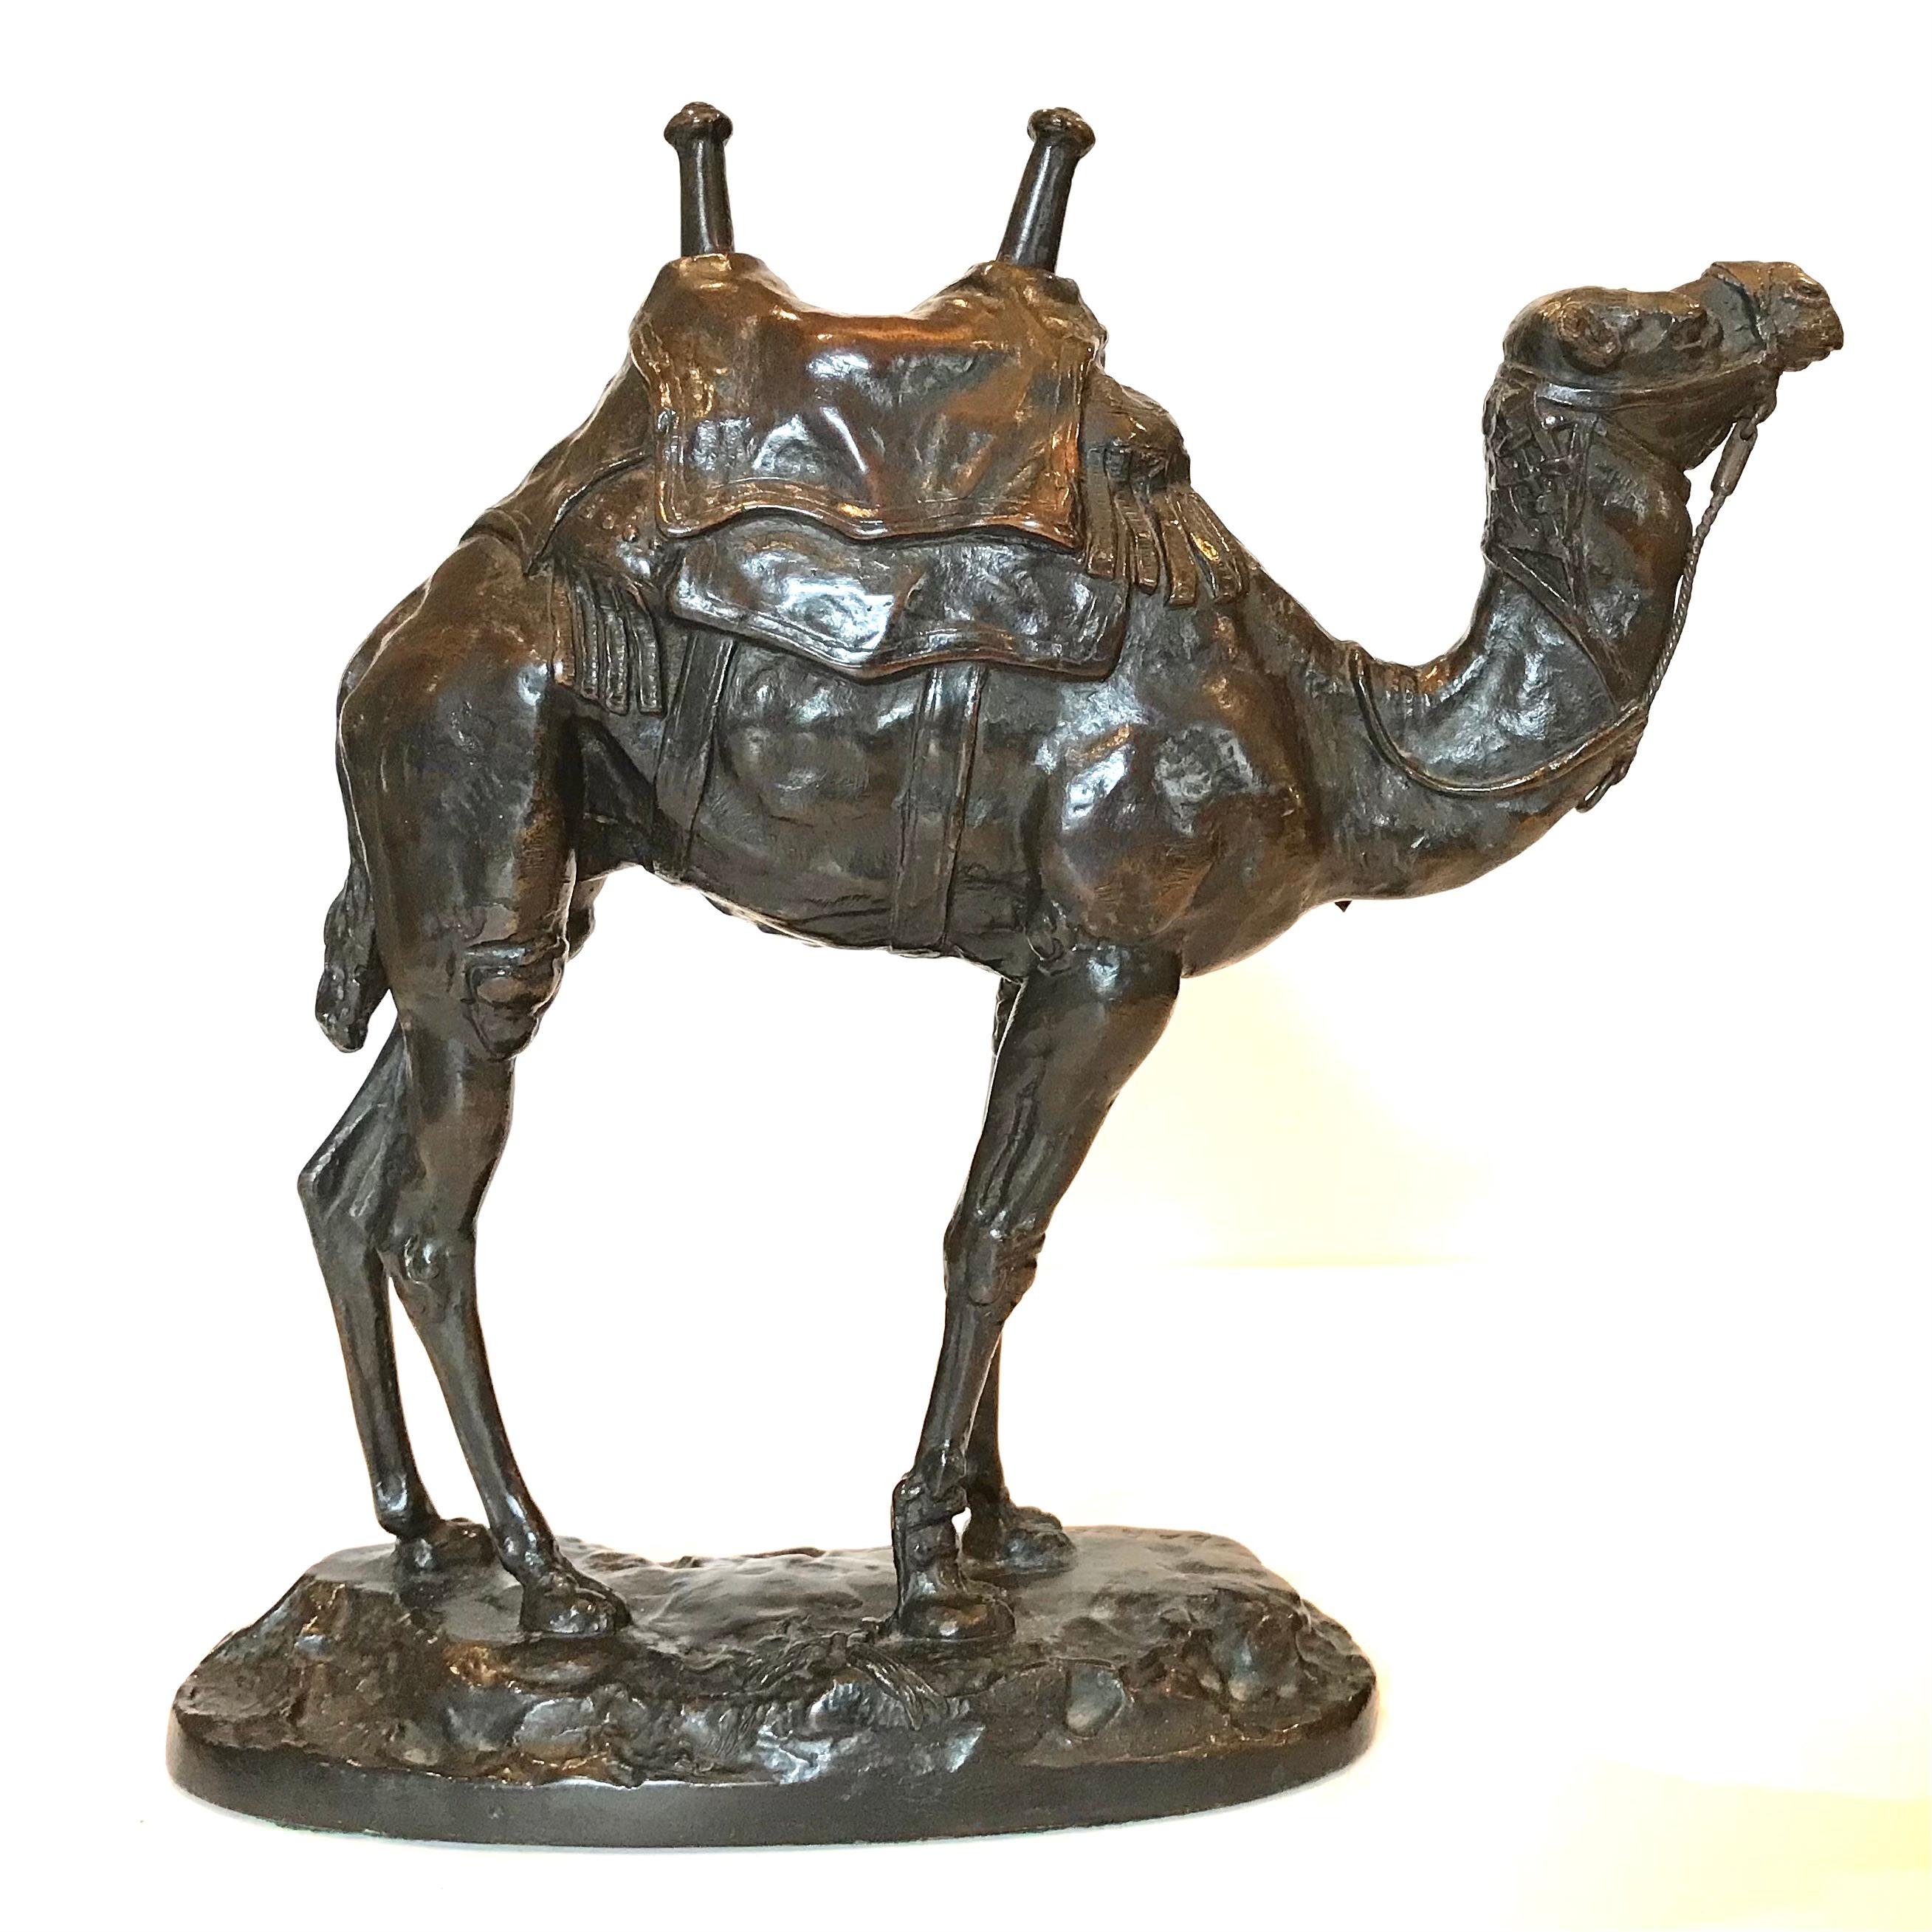 ANTOINE-LOUIS BARYE (FRENCH, 1796-1875): A patinated bronze model of Dromadaire harnaché d'Égypte

Signed 'BARYE' and stamped 'BARYE' by the Brame foundry
Raised on naturalistic base,  

Height: 10 Inches (25cm high)
Length: 10